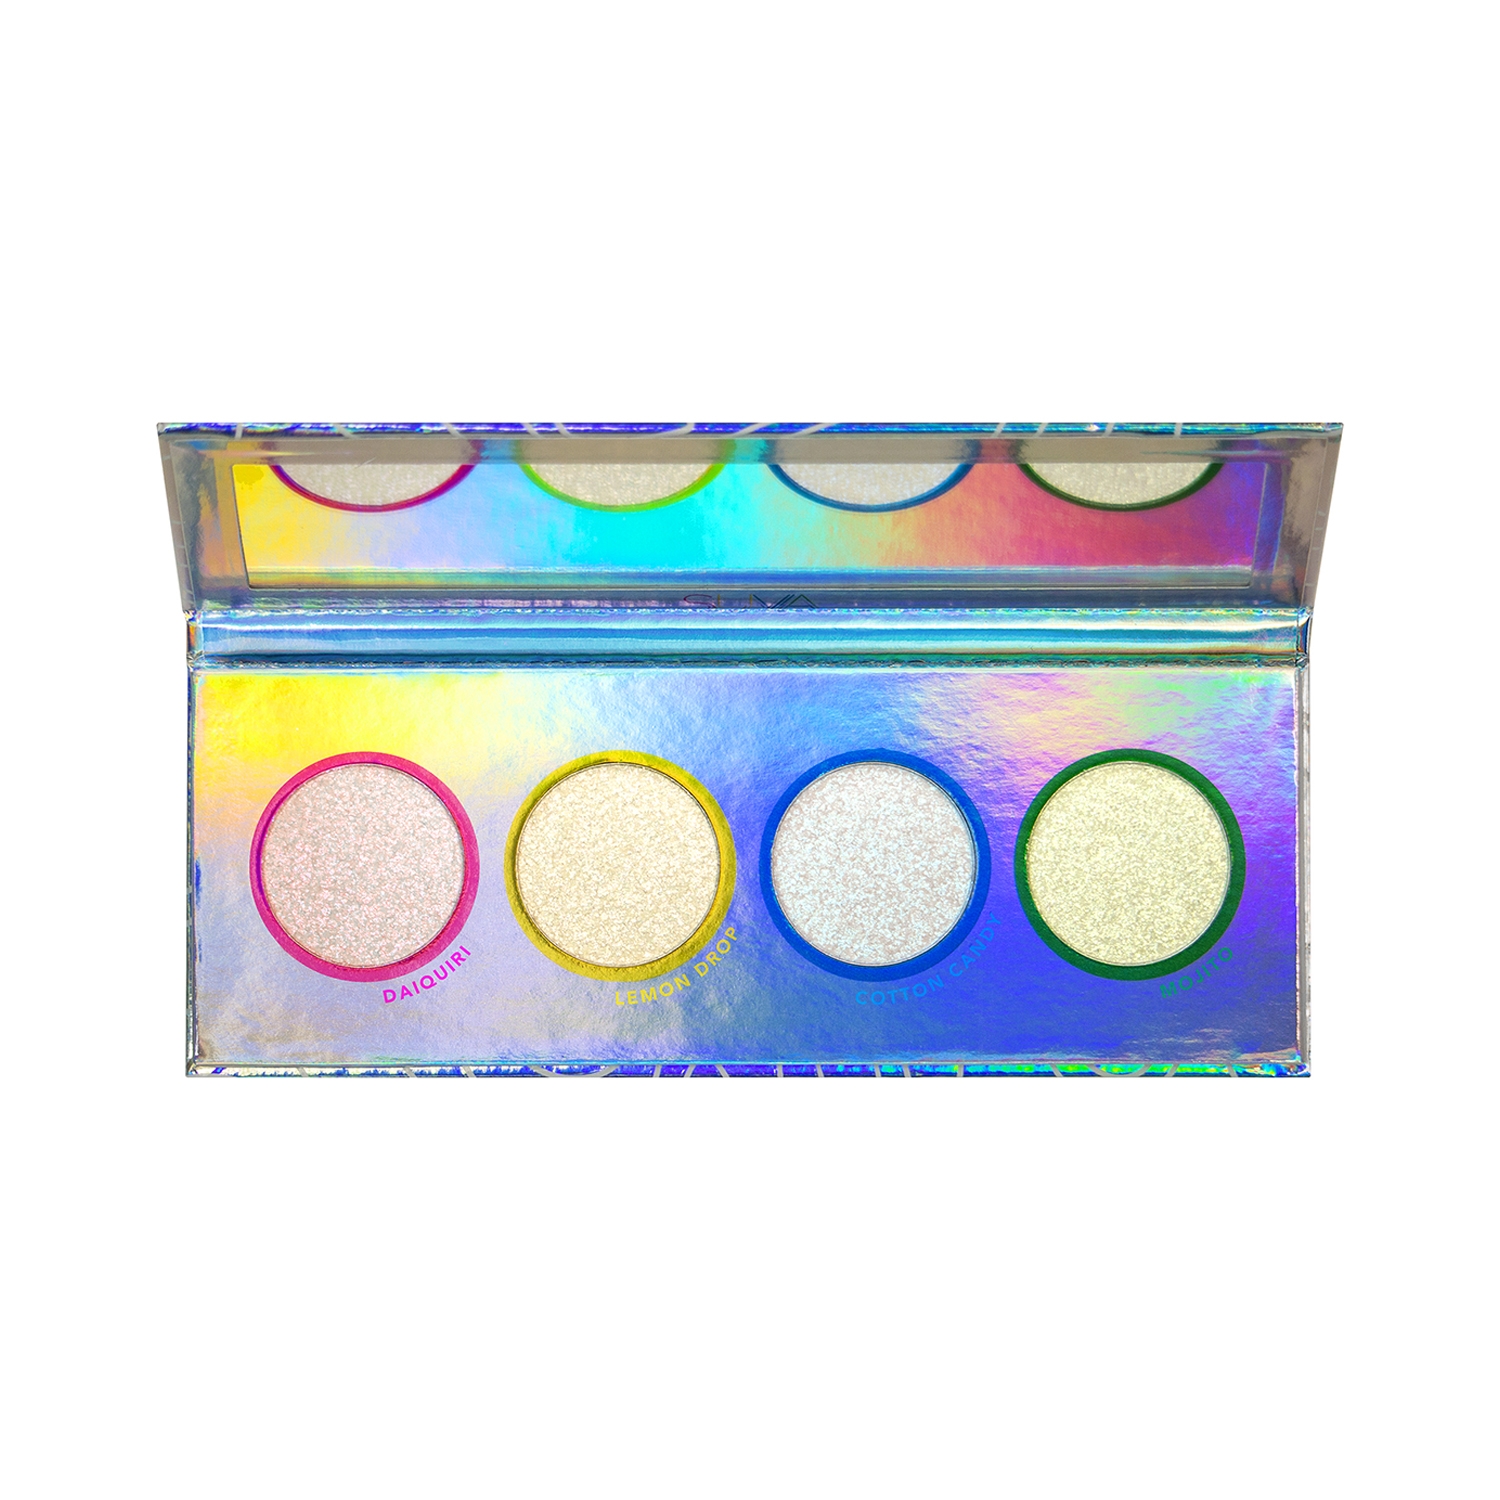 SUVA Beauty | SUVA Beauty Pressed Pigment Face Palette - Toppers (11.7g)